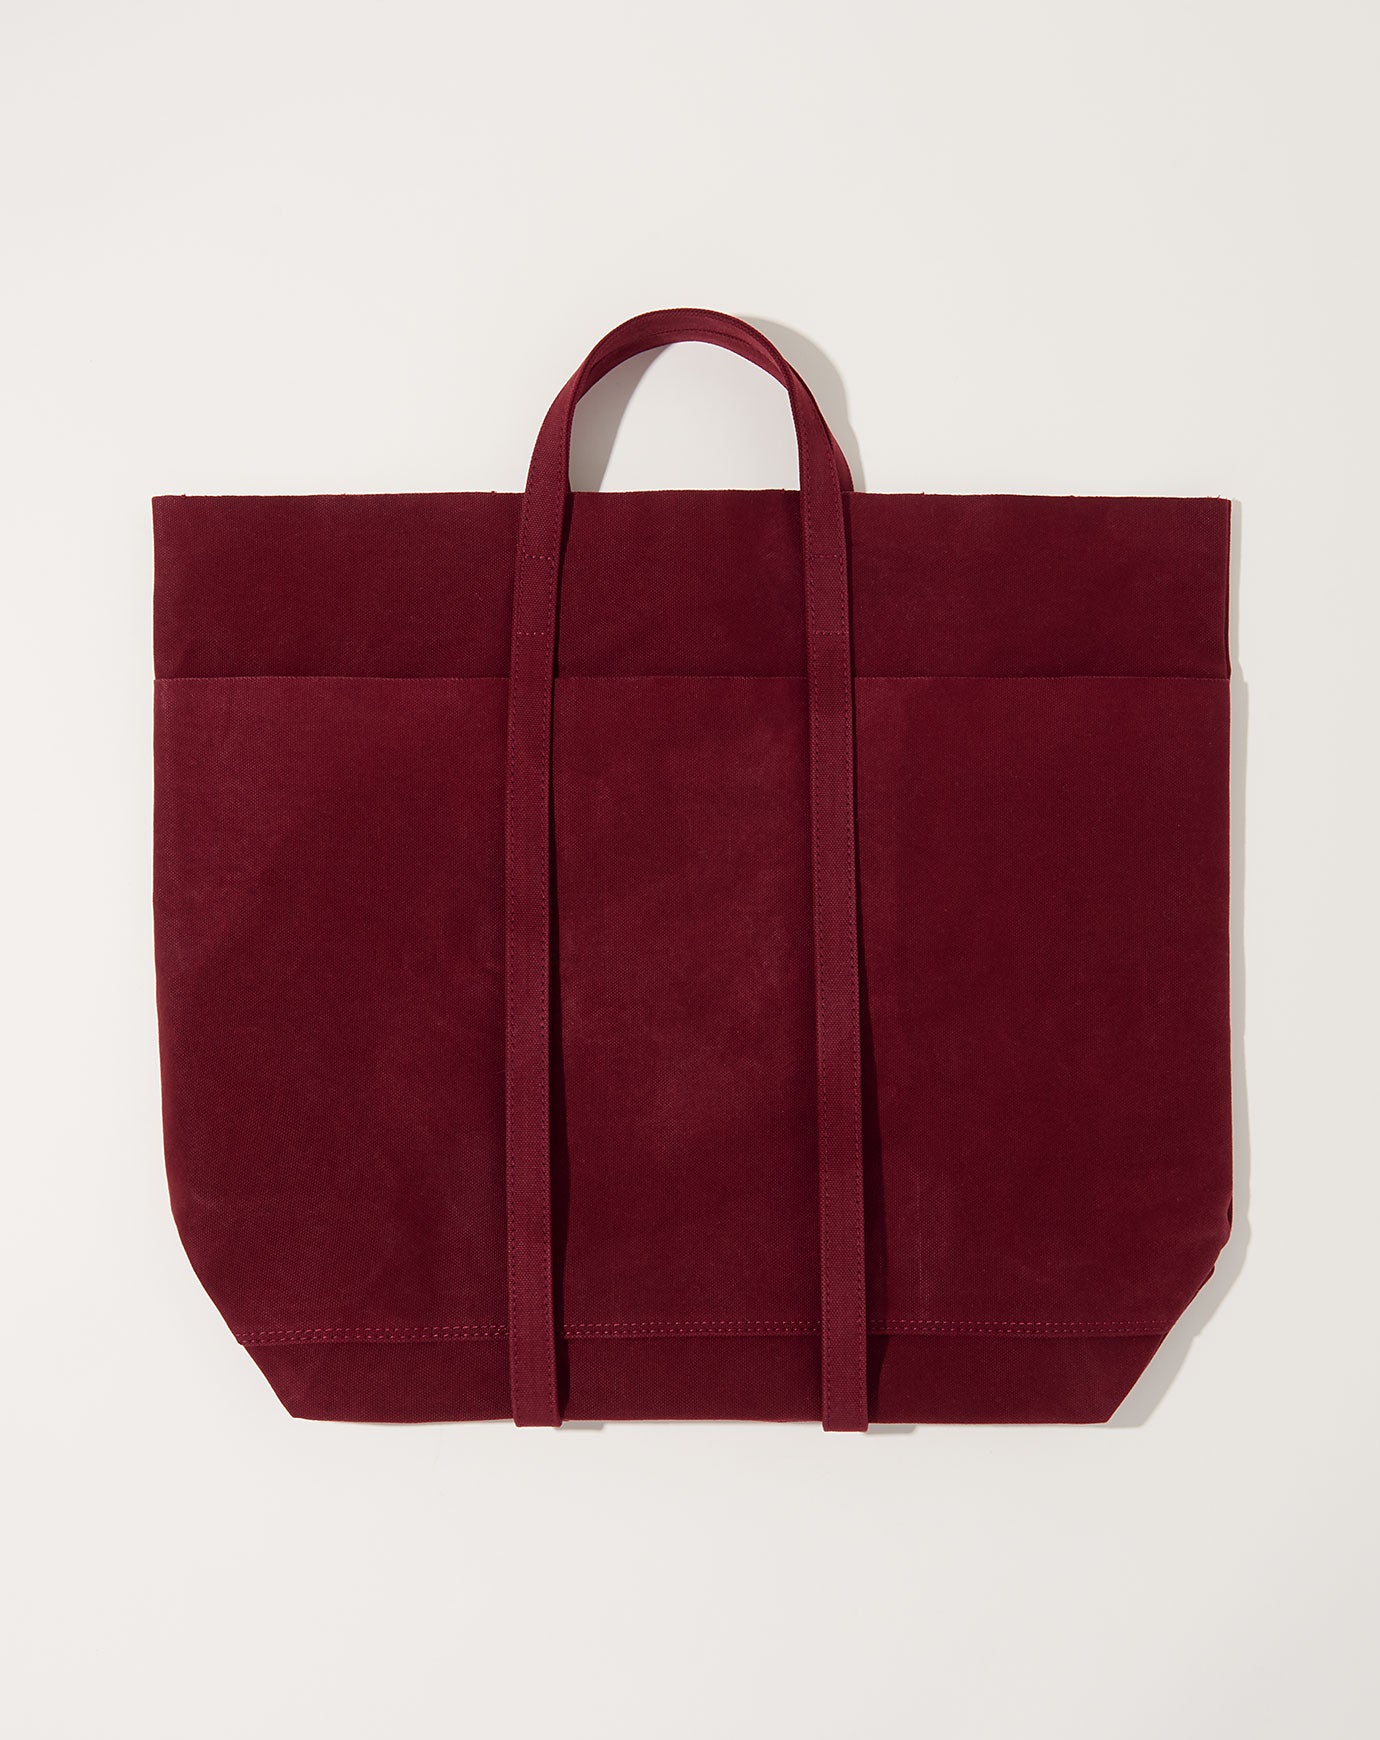 Amiacalva Washed Canvas 6 Pocket Tall Tote in Burgundy